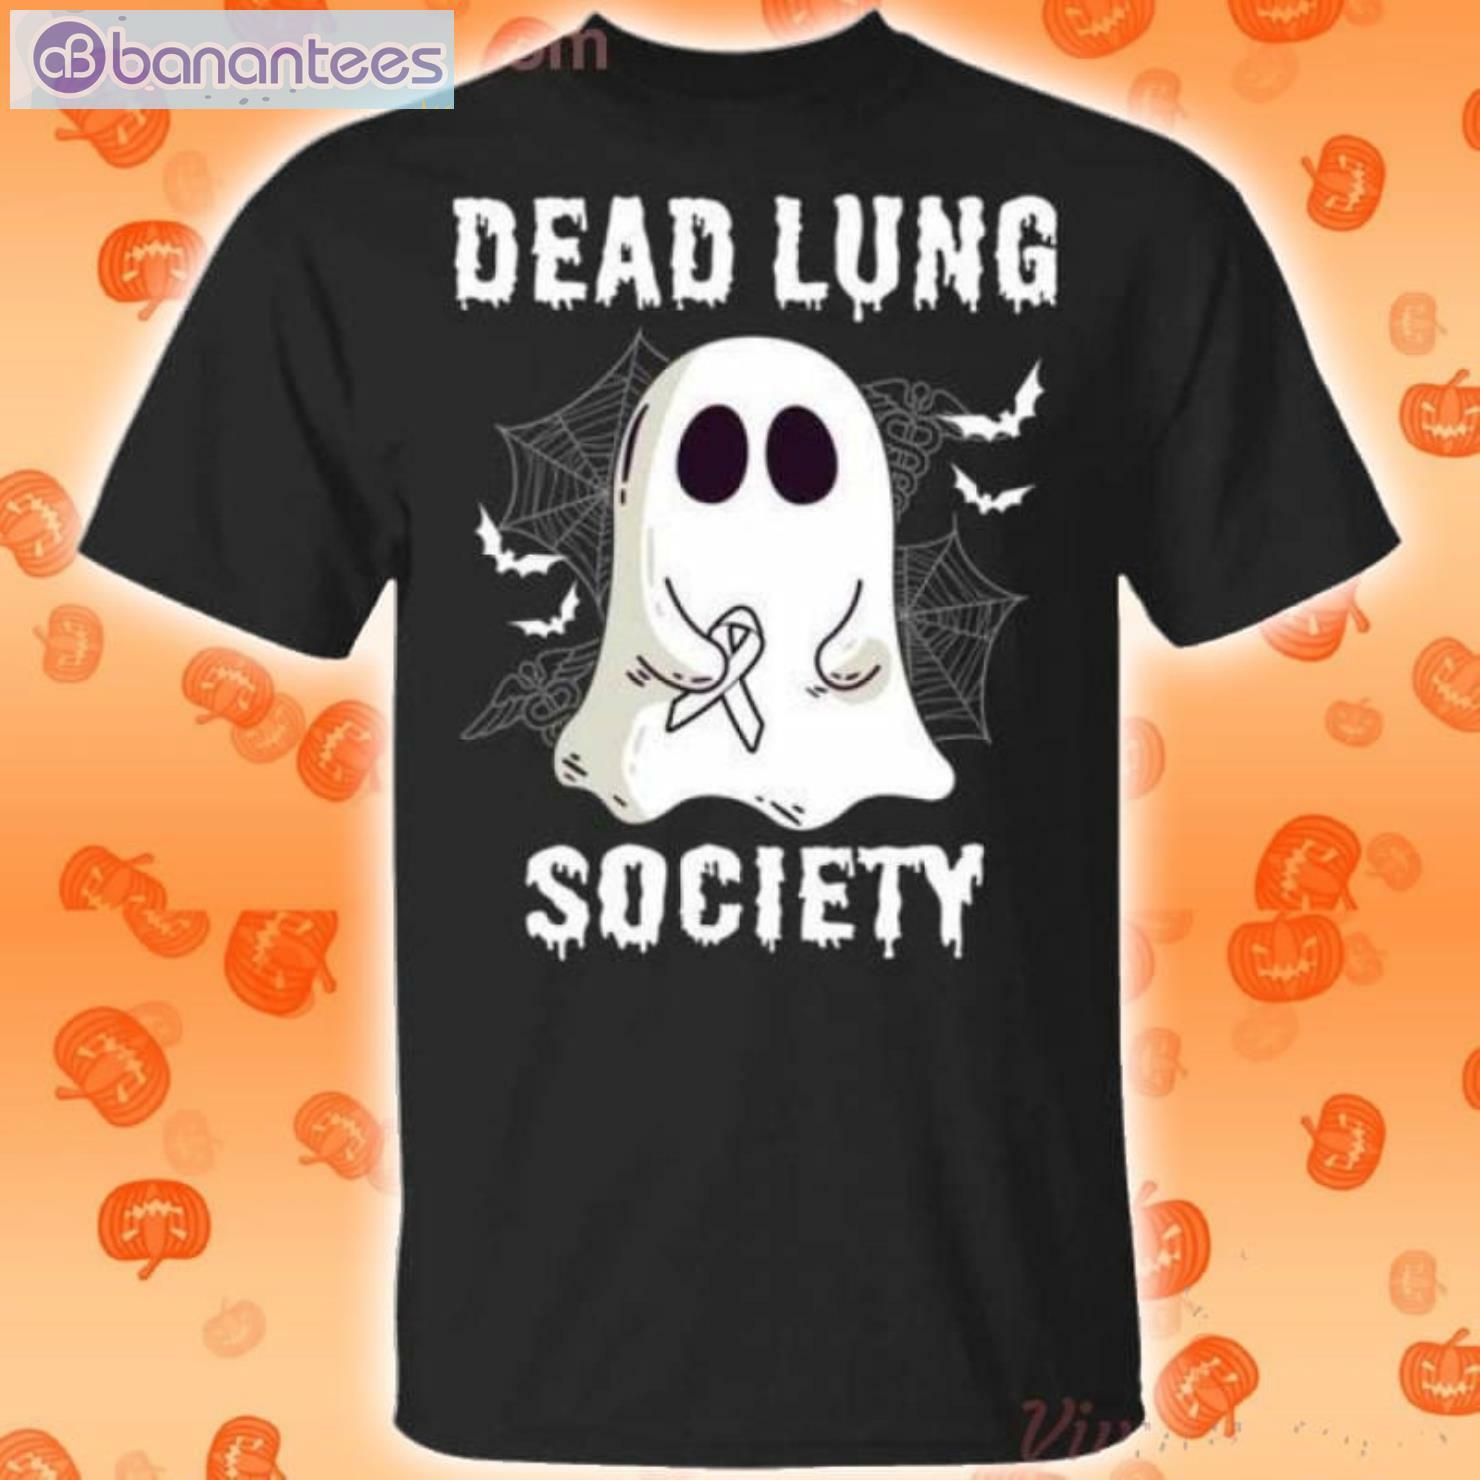 Dead Lung Society Boo Ghost Halloween Funny T-Shirt Product Photo 1 Product photo 1